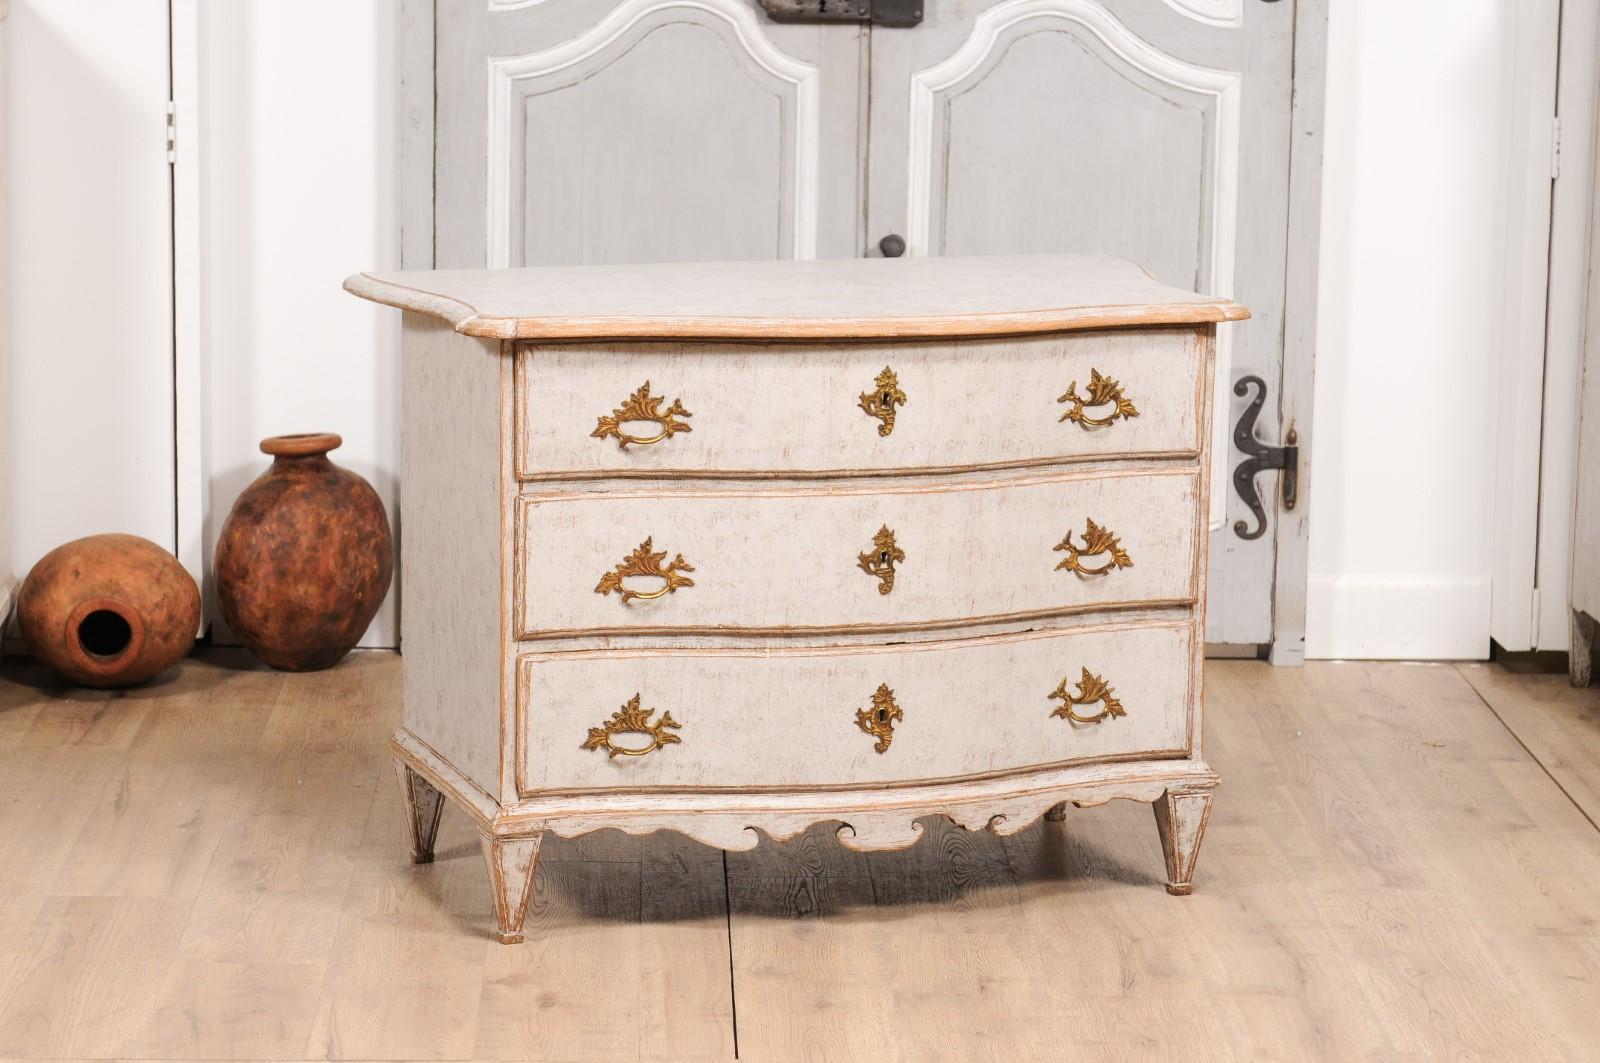 Carved 1760s Rococo Period Painted Swedish Chest of Drawers with Serpentine Front